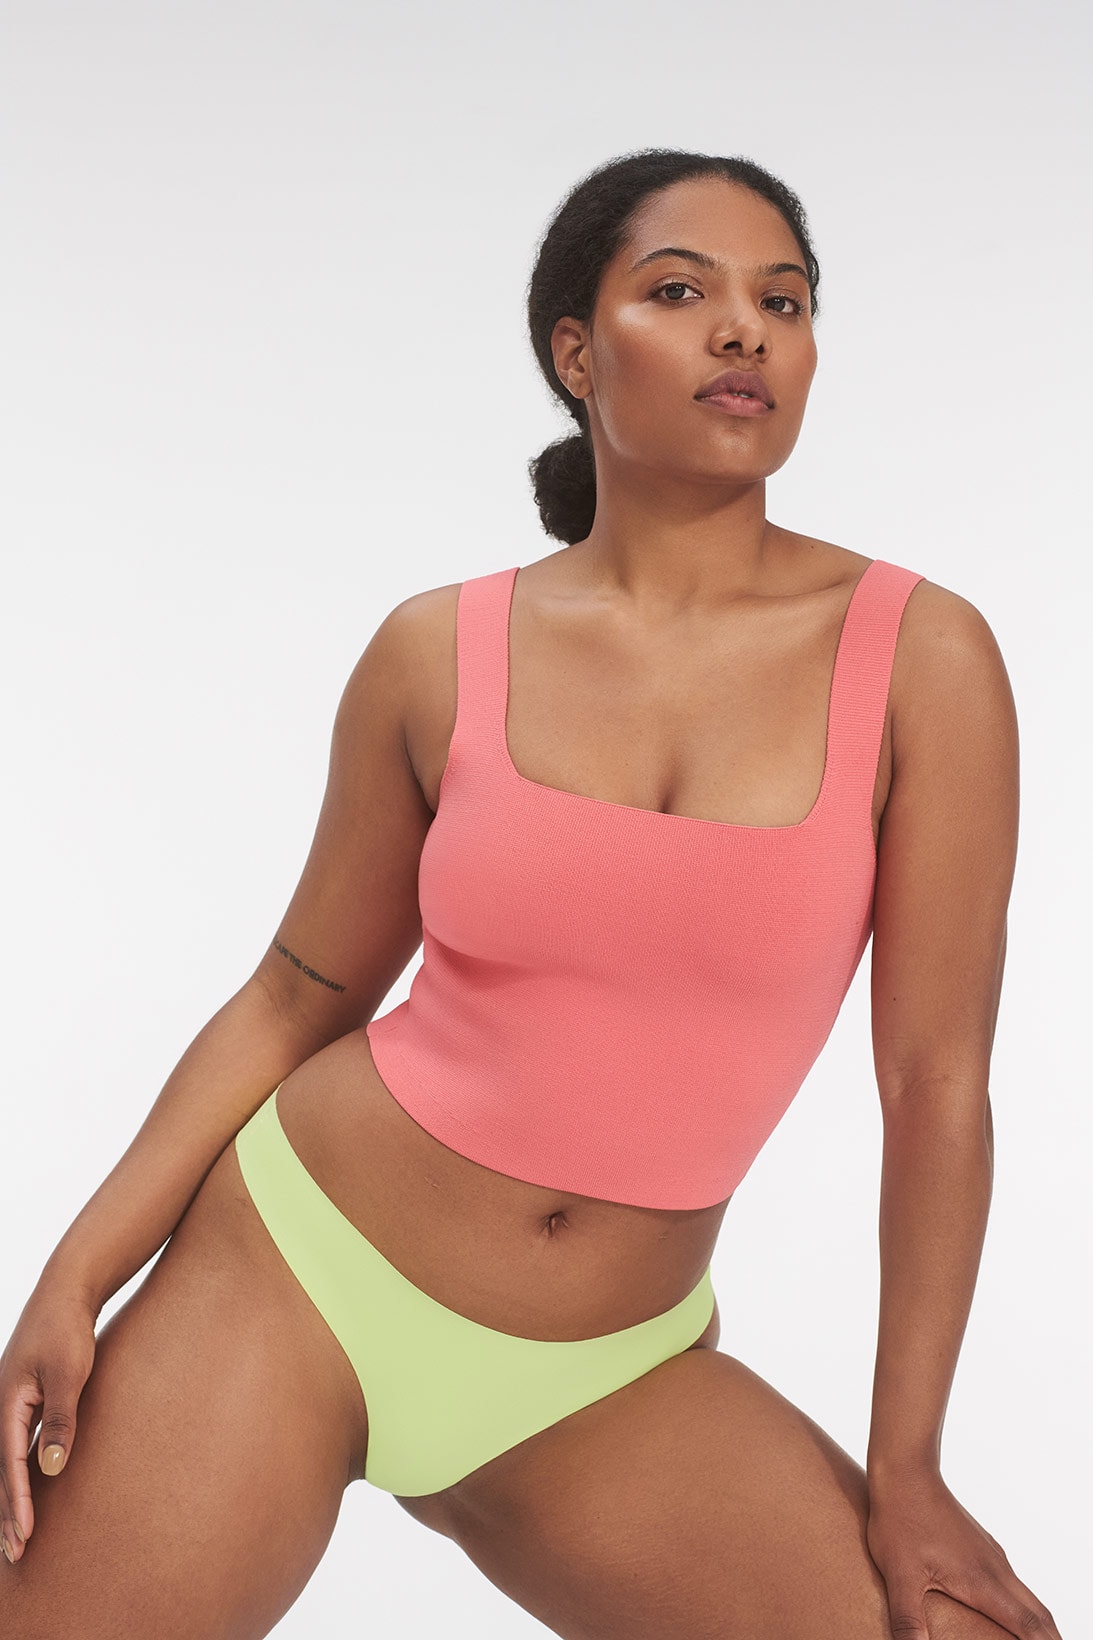 parade universal underwear carbon neutral sustainable seamless thong green tank top pink